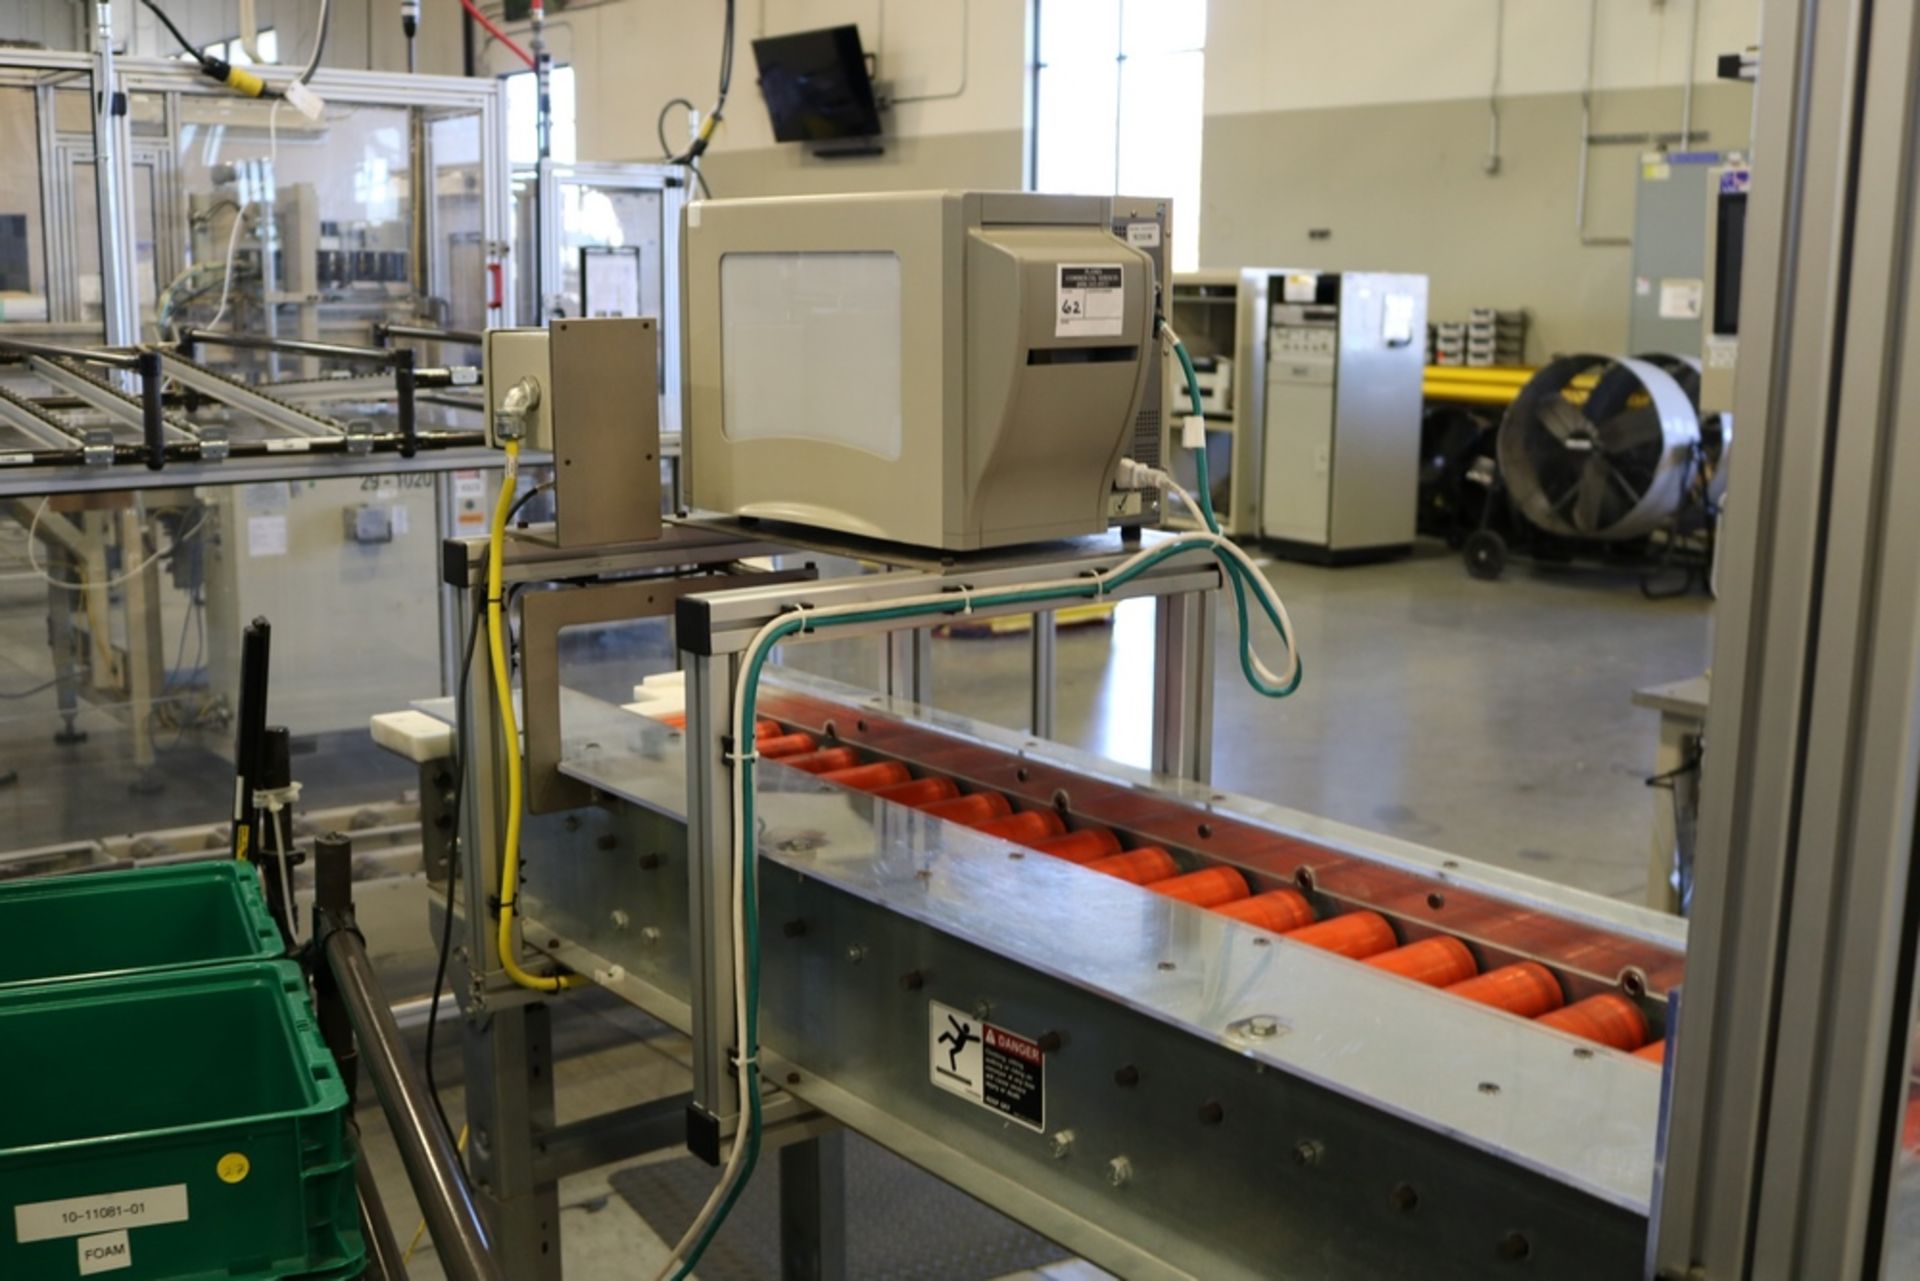 3 Station Automated Module Assembly Line Built by Pro Tech Machine for Enerdel Module Assembly - Image 22 of 48